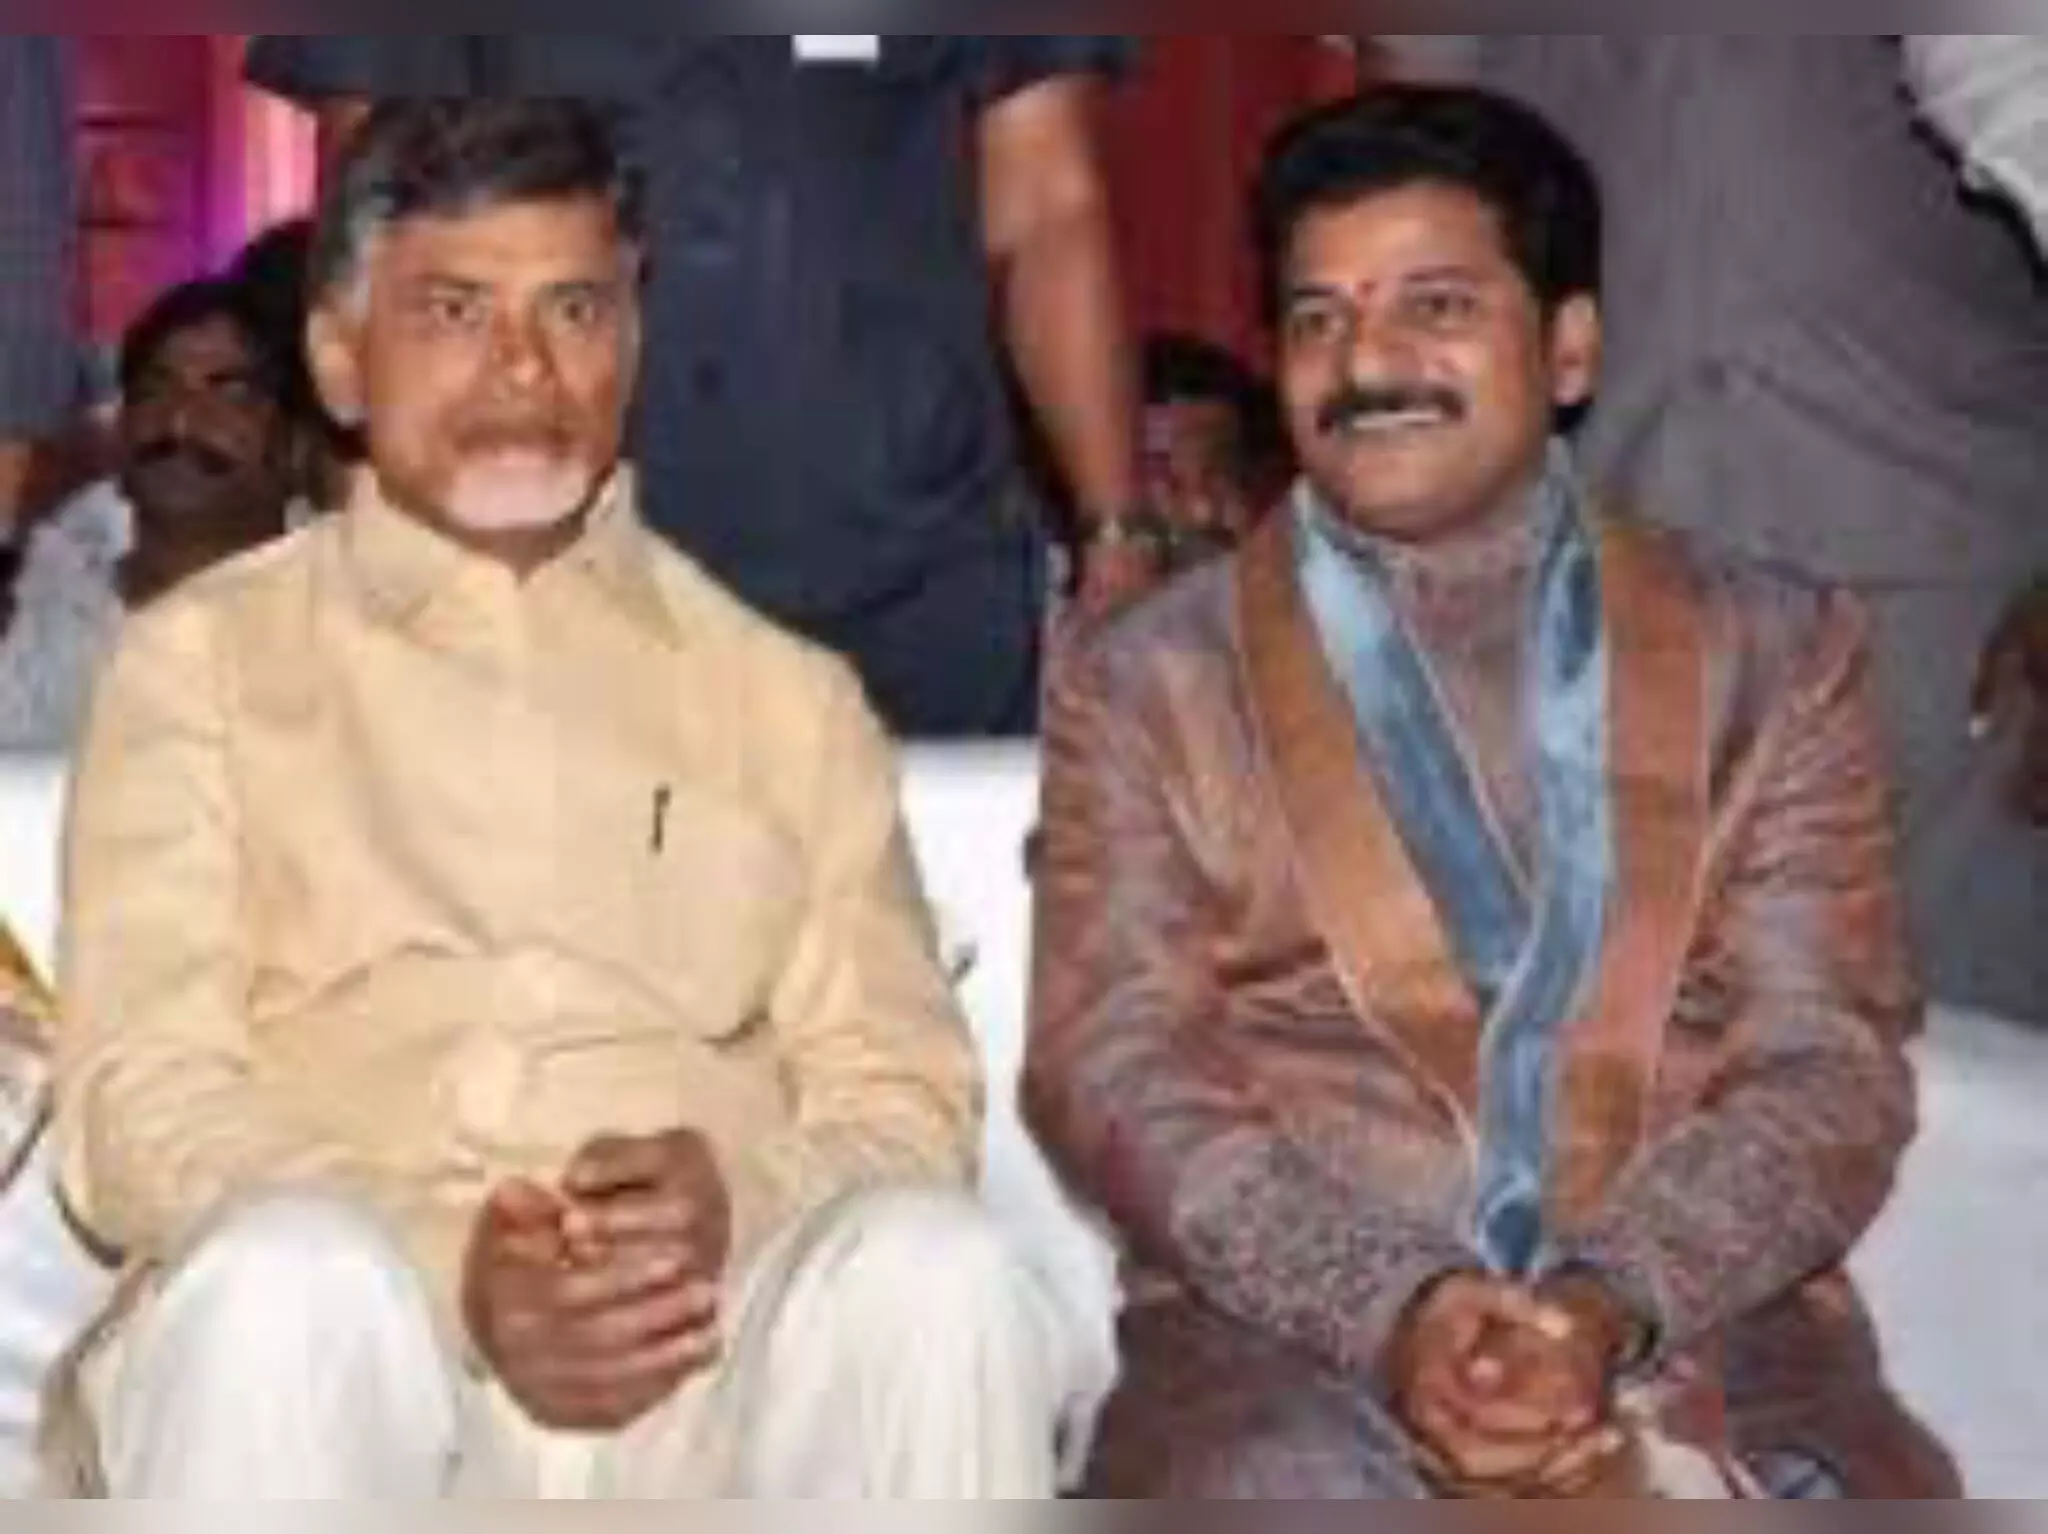 NewsTAP exclusive: Chandrababu Naidu, Revanth Reddy meet for 2 hrs in Begumpet airport. Is BJP aware?